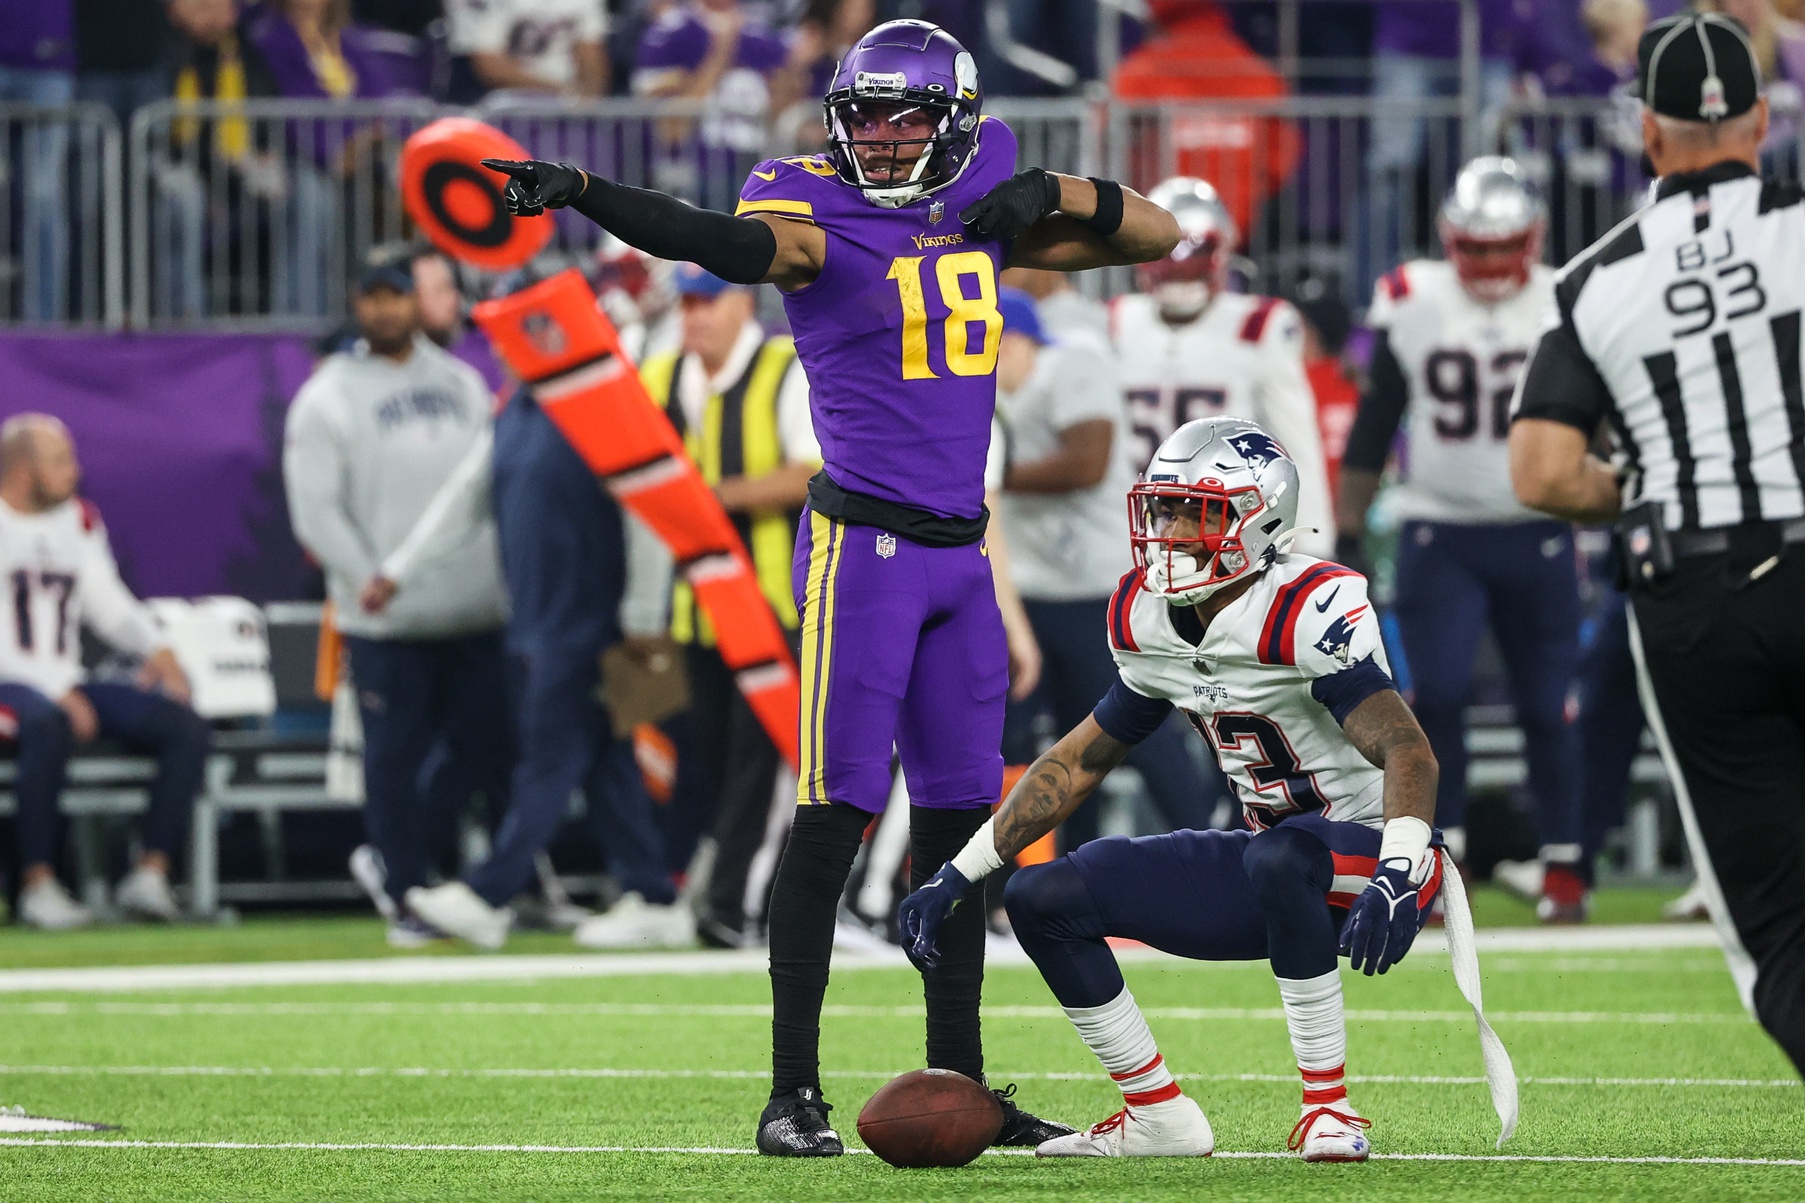 Vikings-Jets: 5 things you can count on